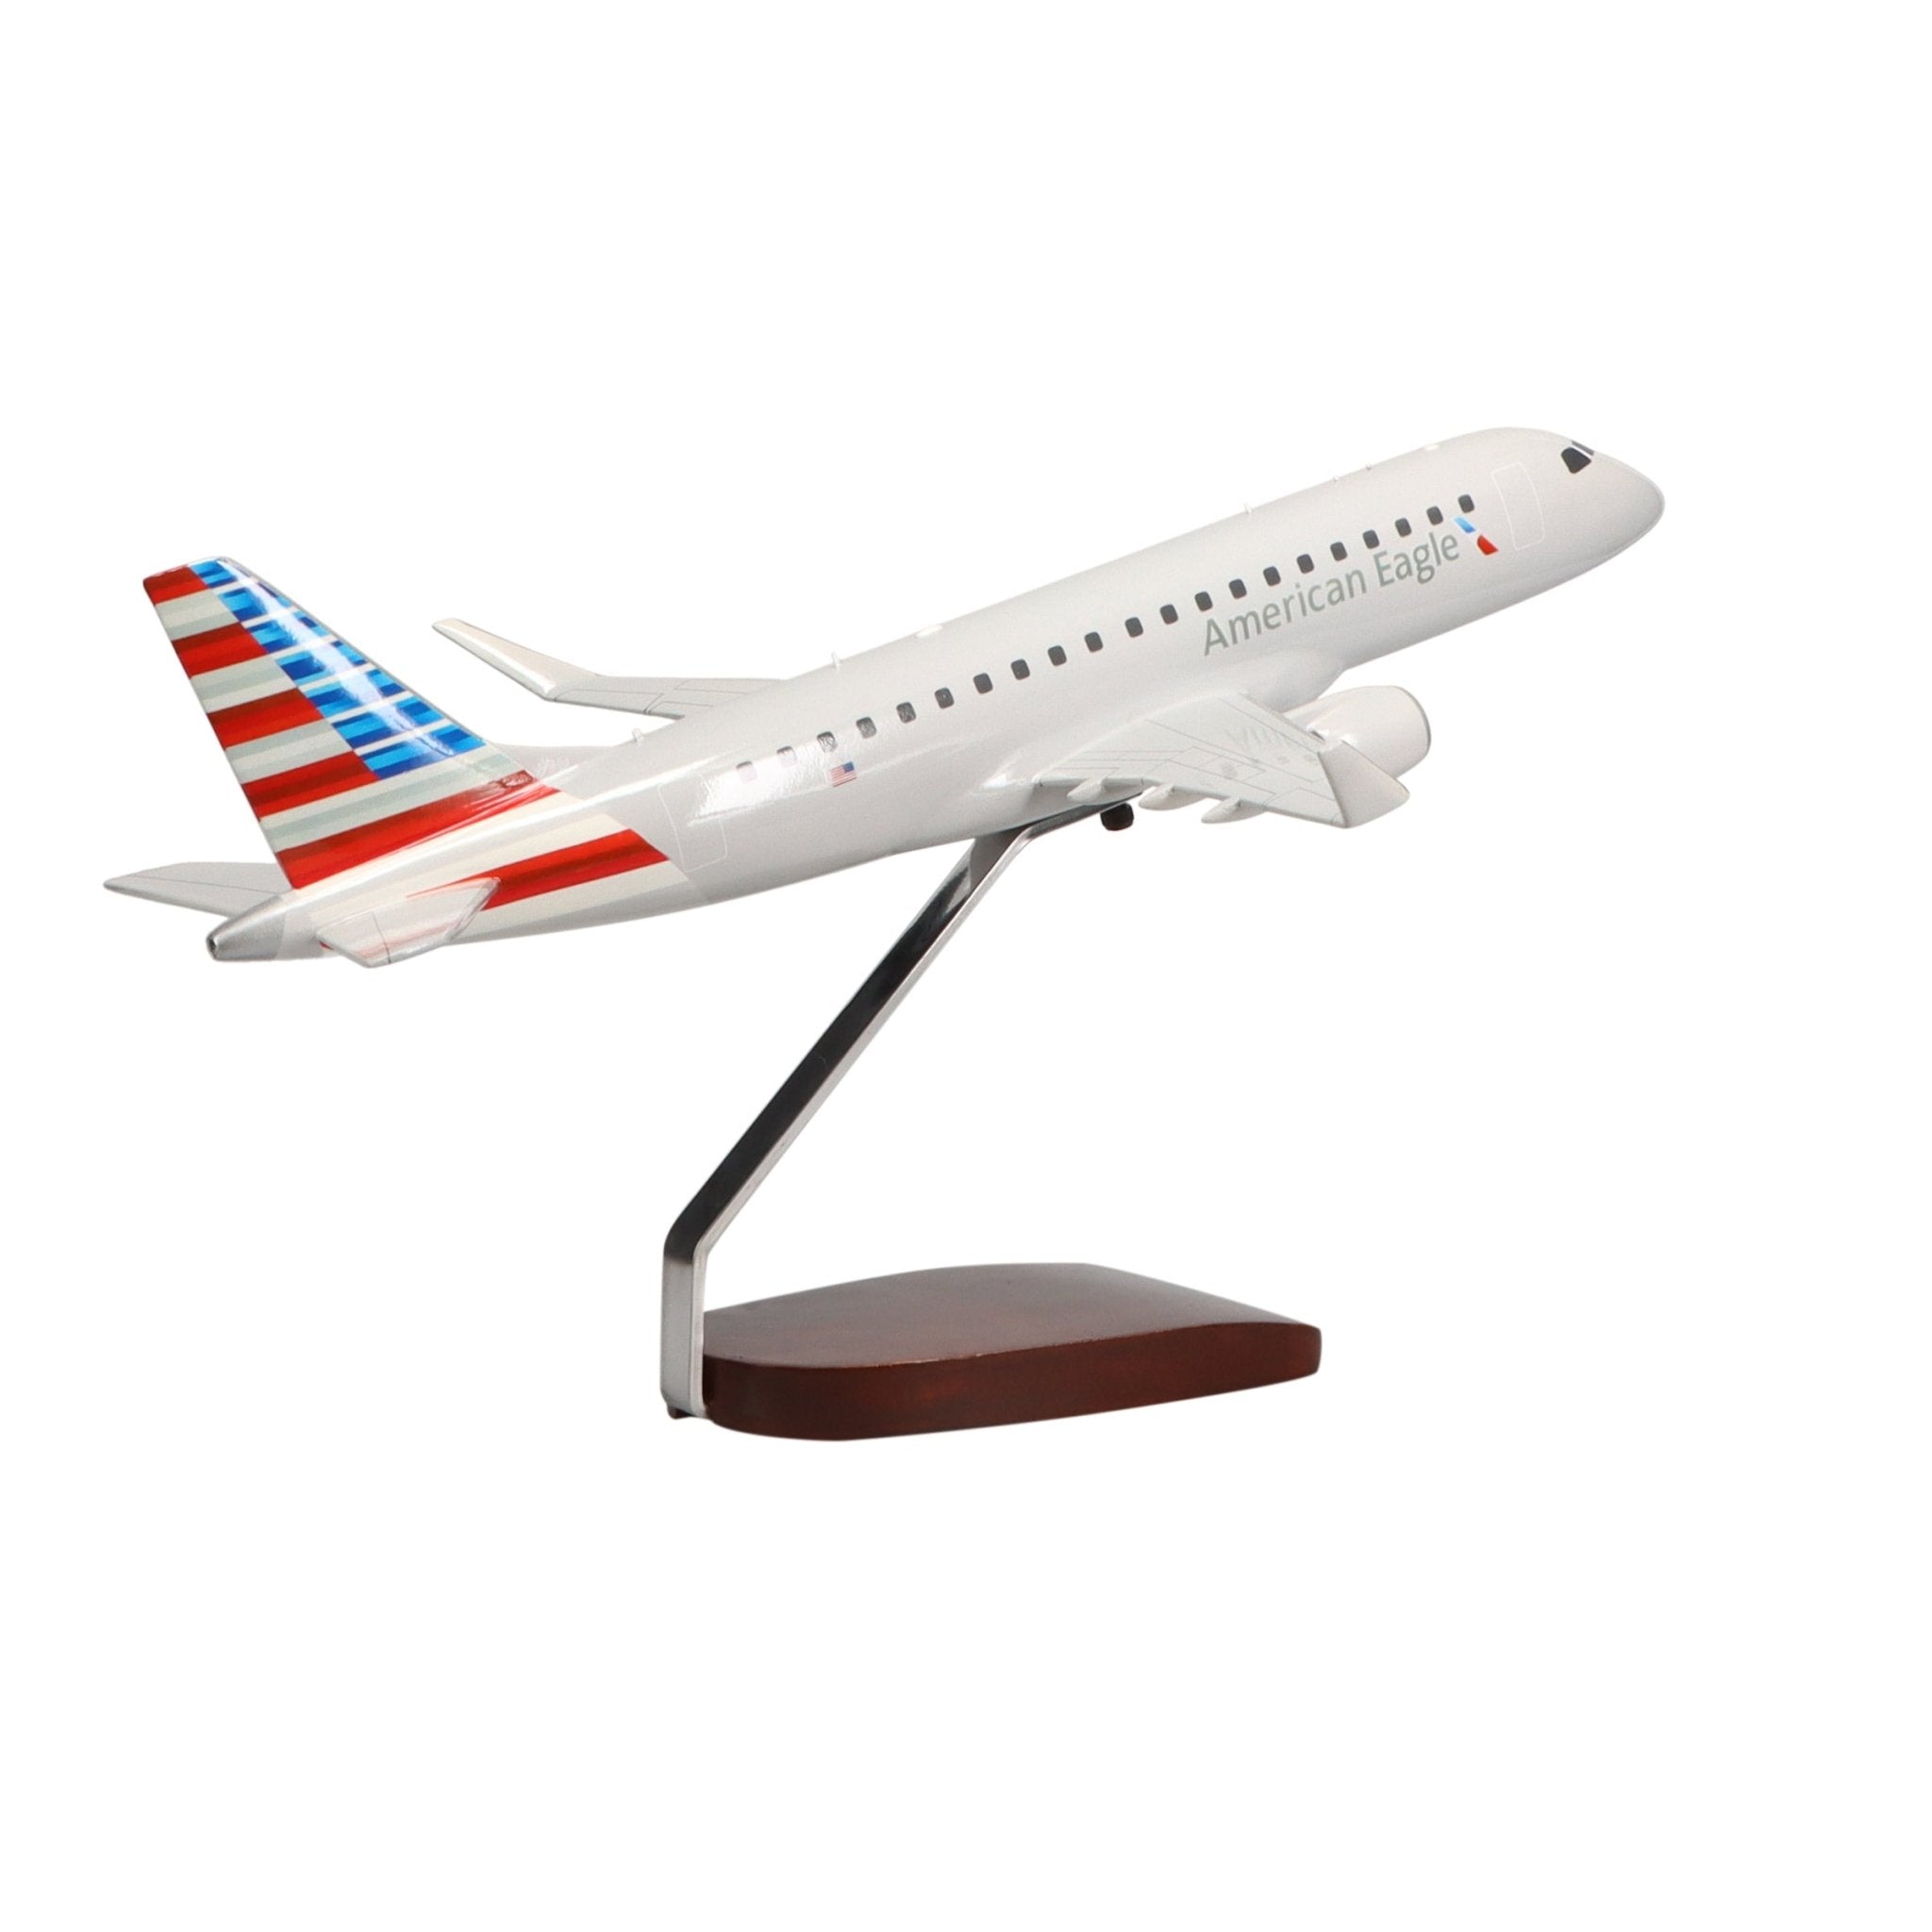 Embraer E175 American Airlines Limited Edition Large Mahogany Model - PilotMall.com